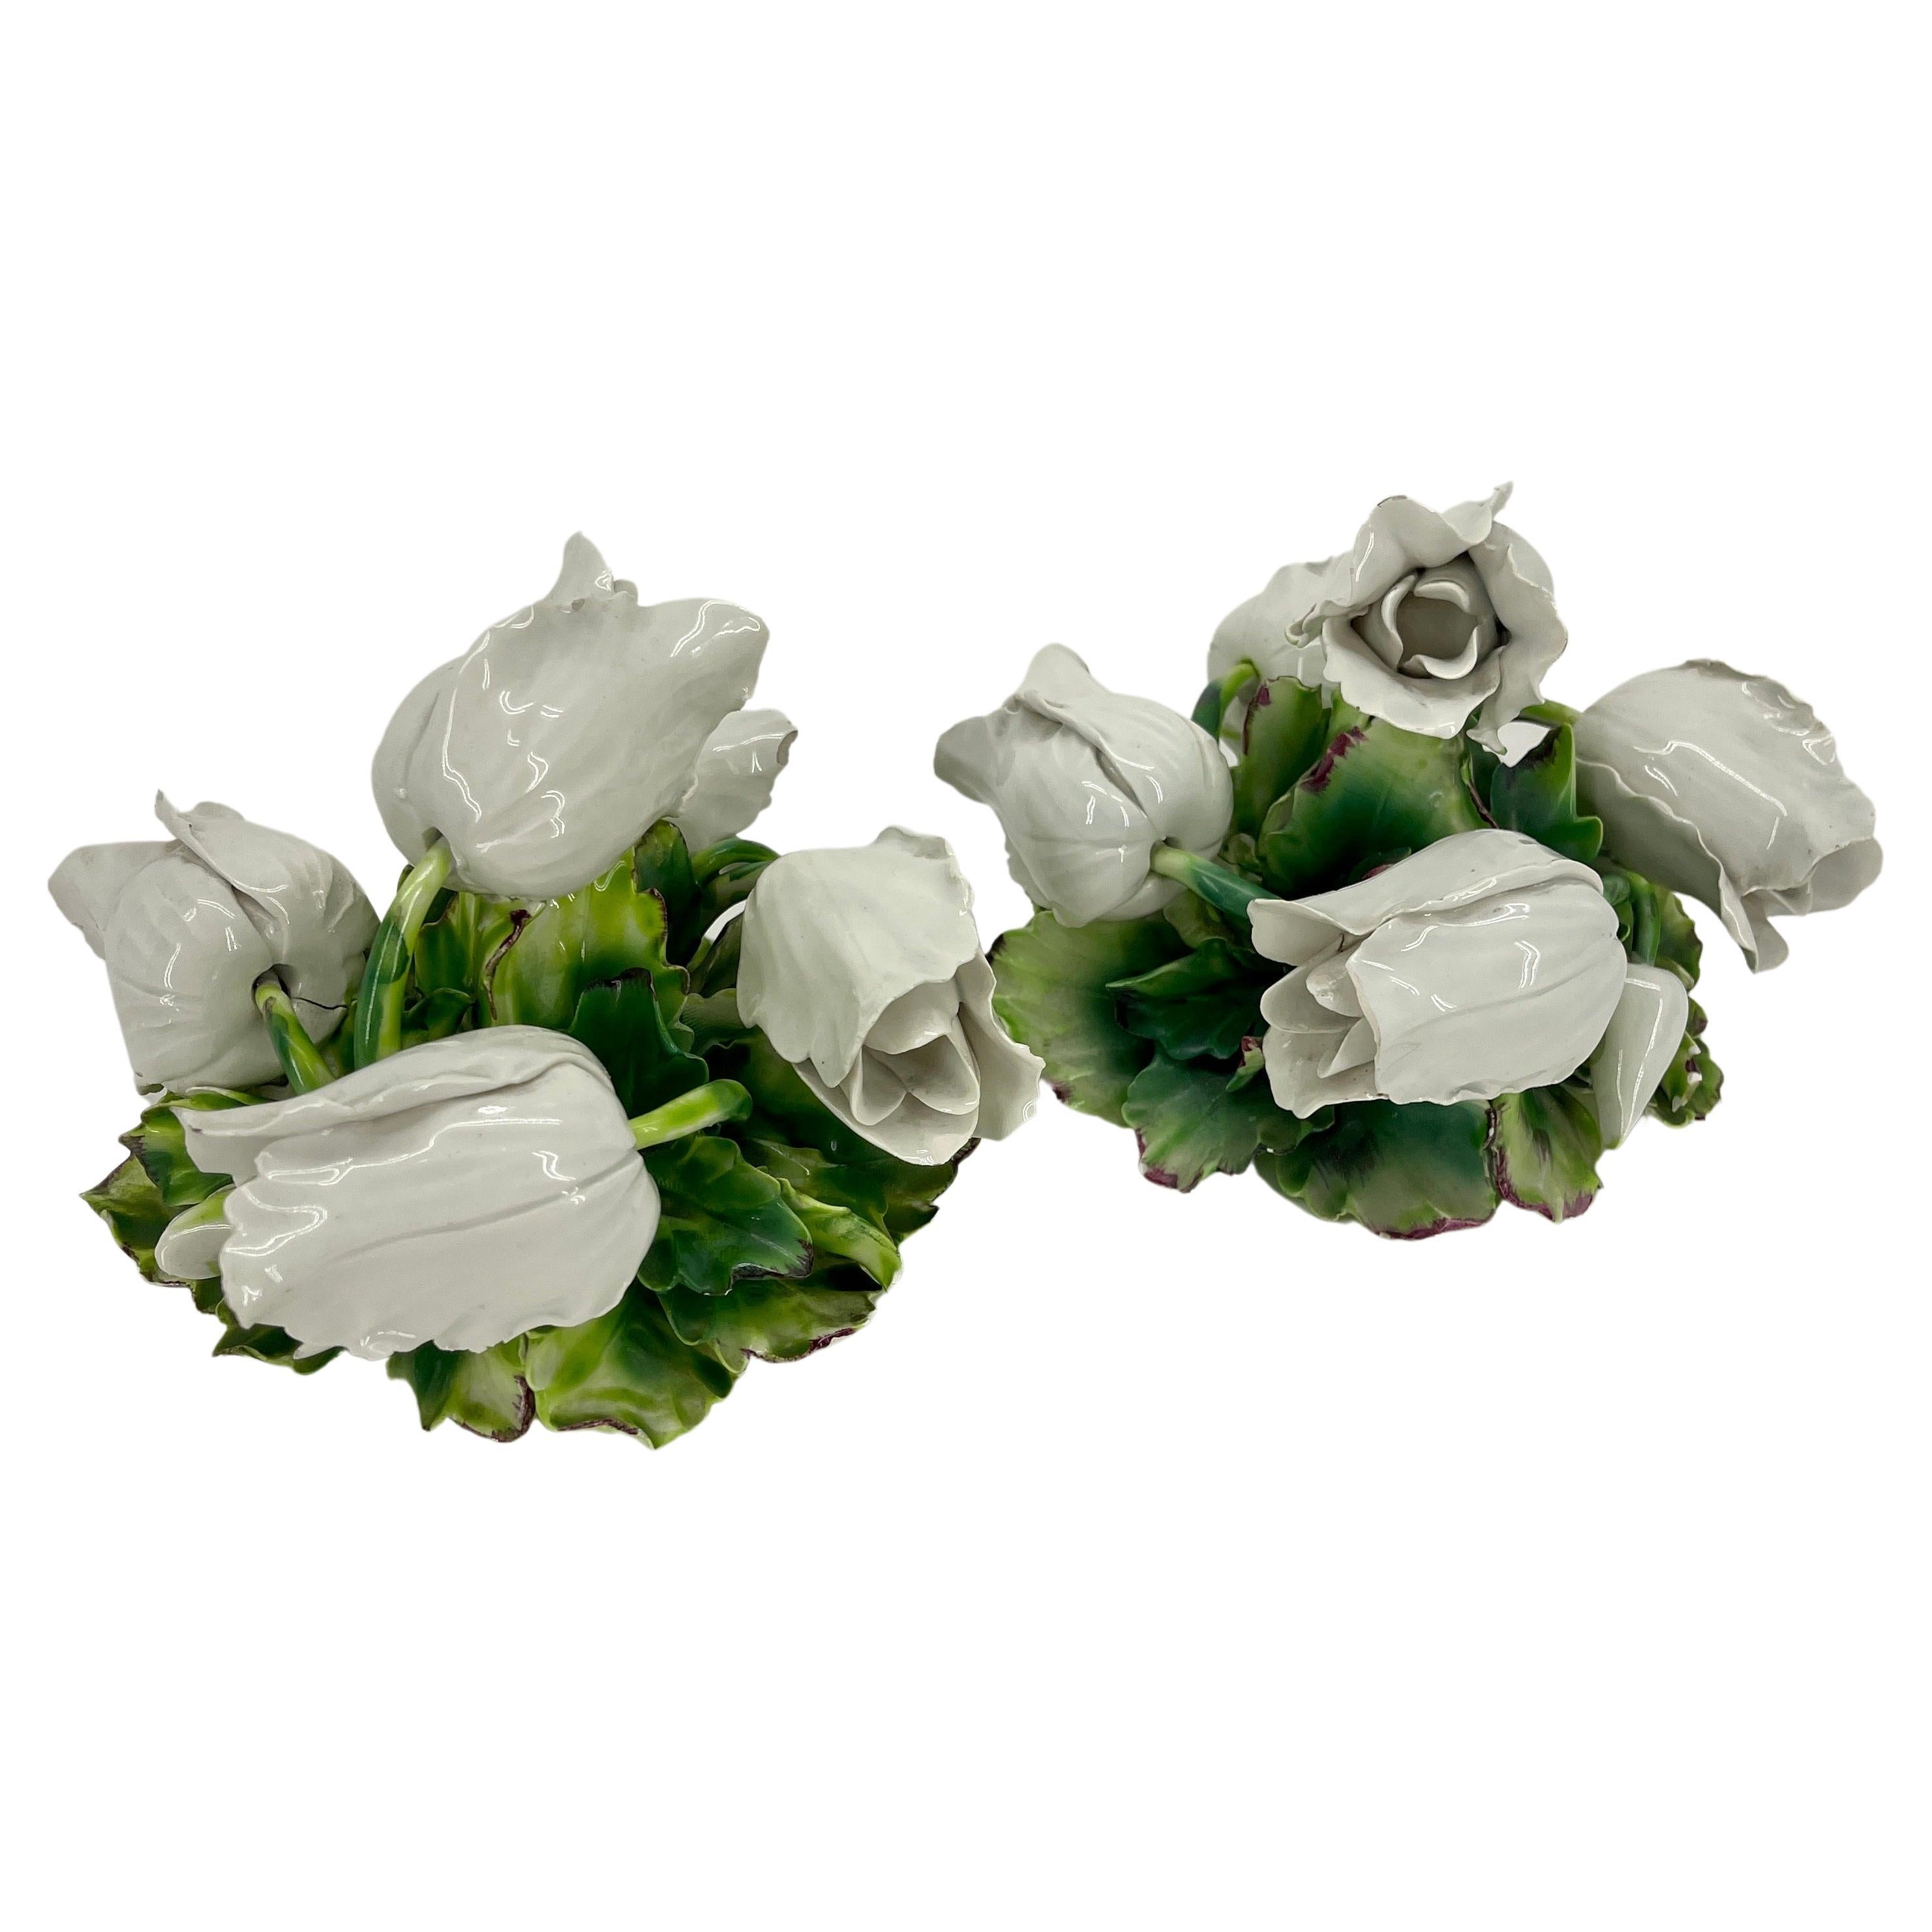 Vintage Pair of Ceramic Tulip Centerpieces, Italy 

These charming hand-painted Italian ceramic sculptures feature an arrangement of white tulips among green foliage. The intricate petals are delicate and very decorative. This pair would be lovely